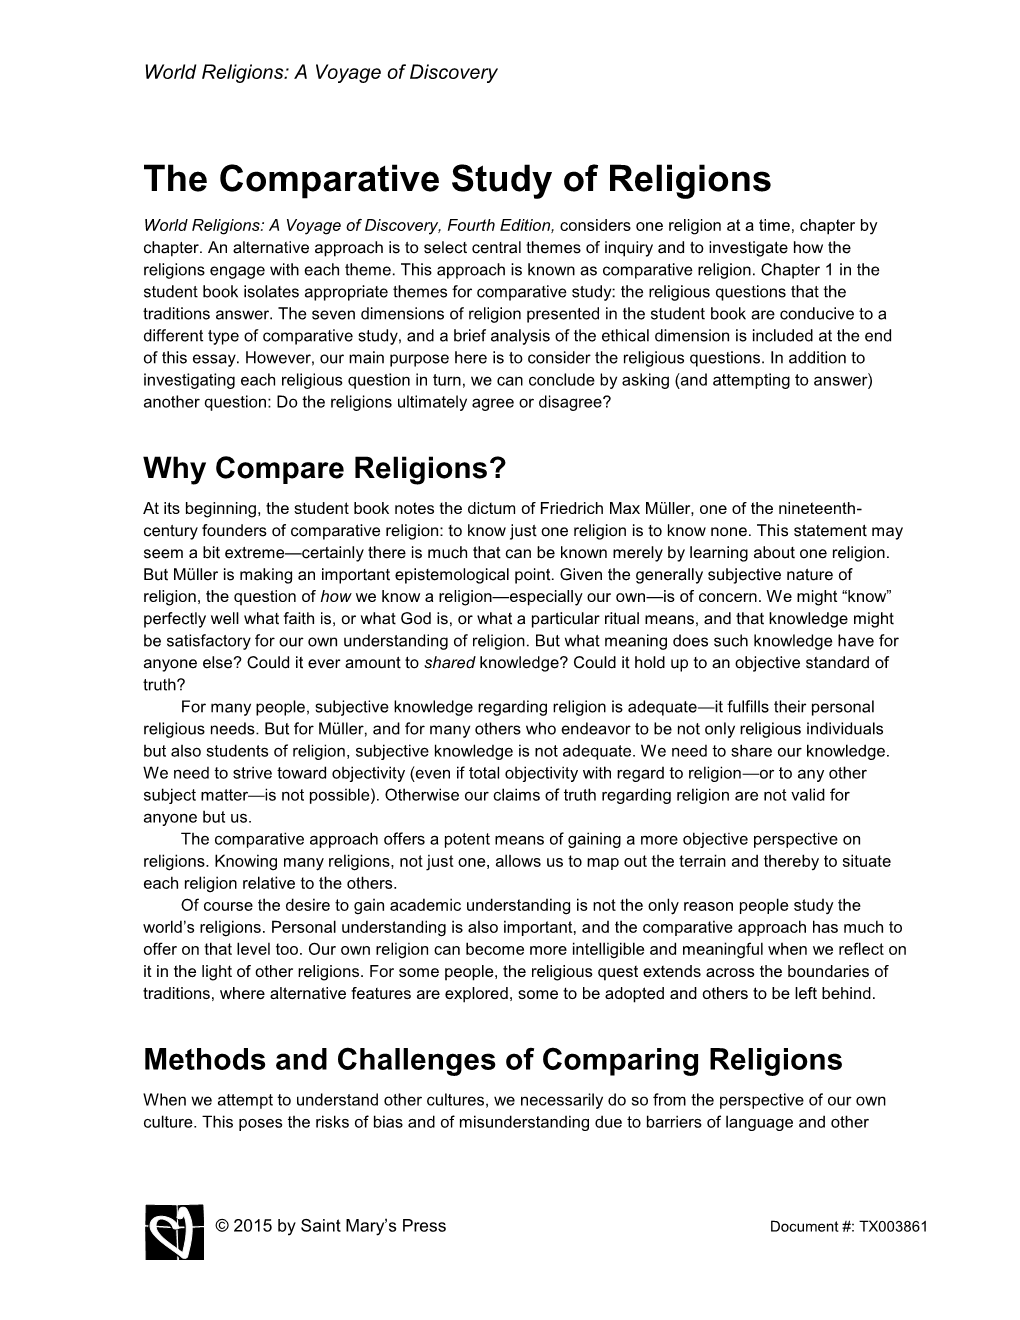 The Comparative Study of Religions World Religions: a Voyage of Discovery, Fourth Edition, Considers One Religion at a Time, Chapter by Chapter